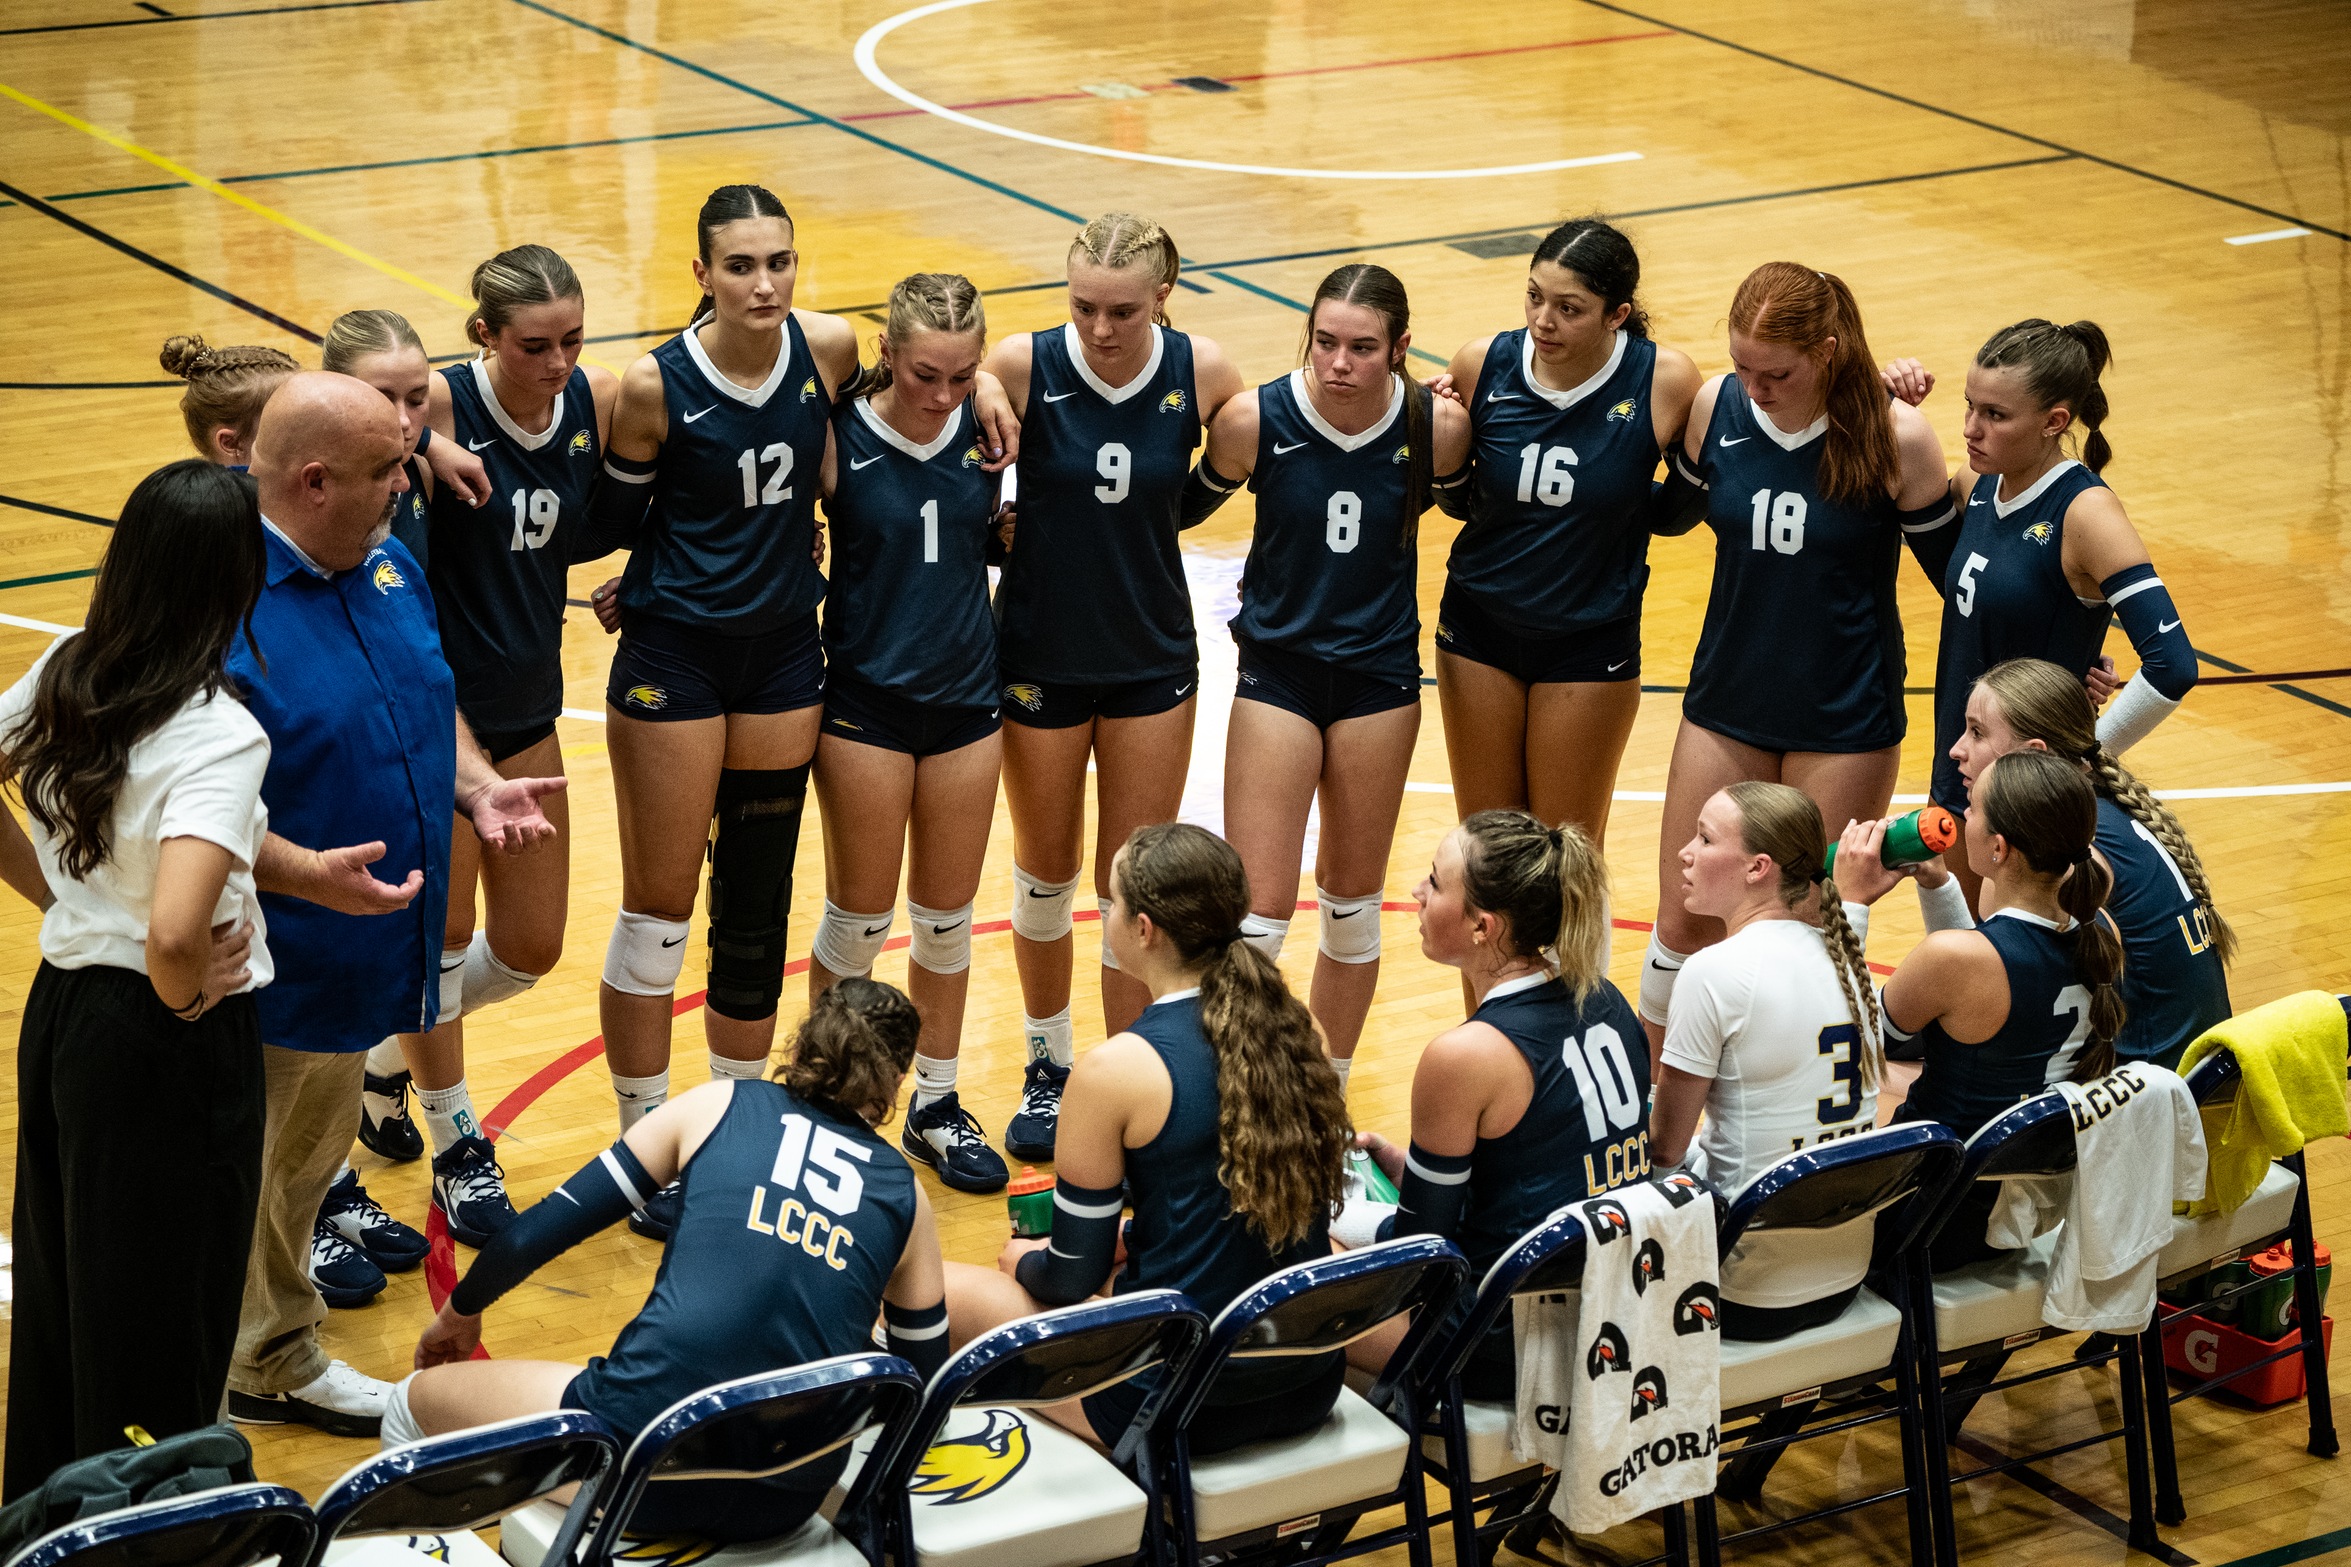 Golden Eagles see 10 match winning streak snapped by #6 Northeastern Junior College